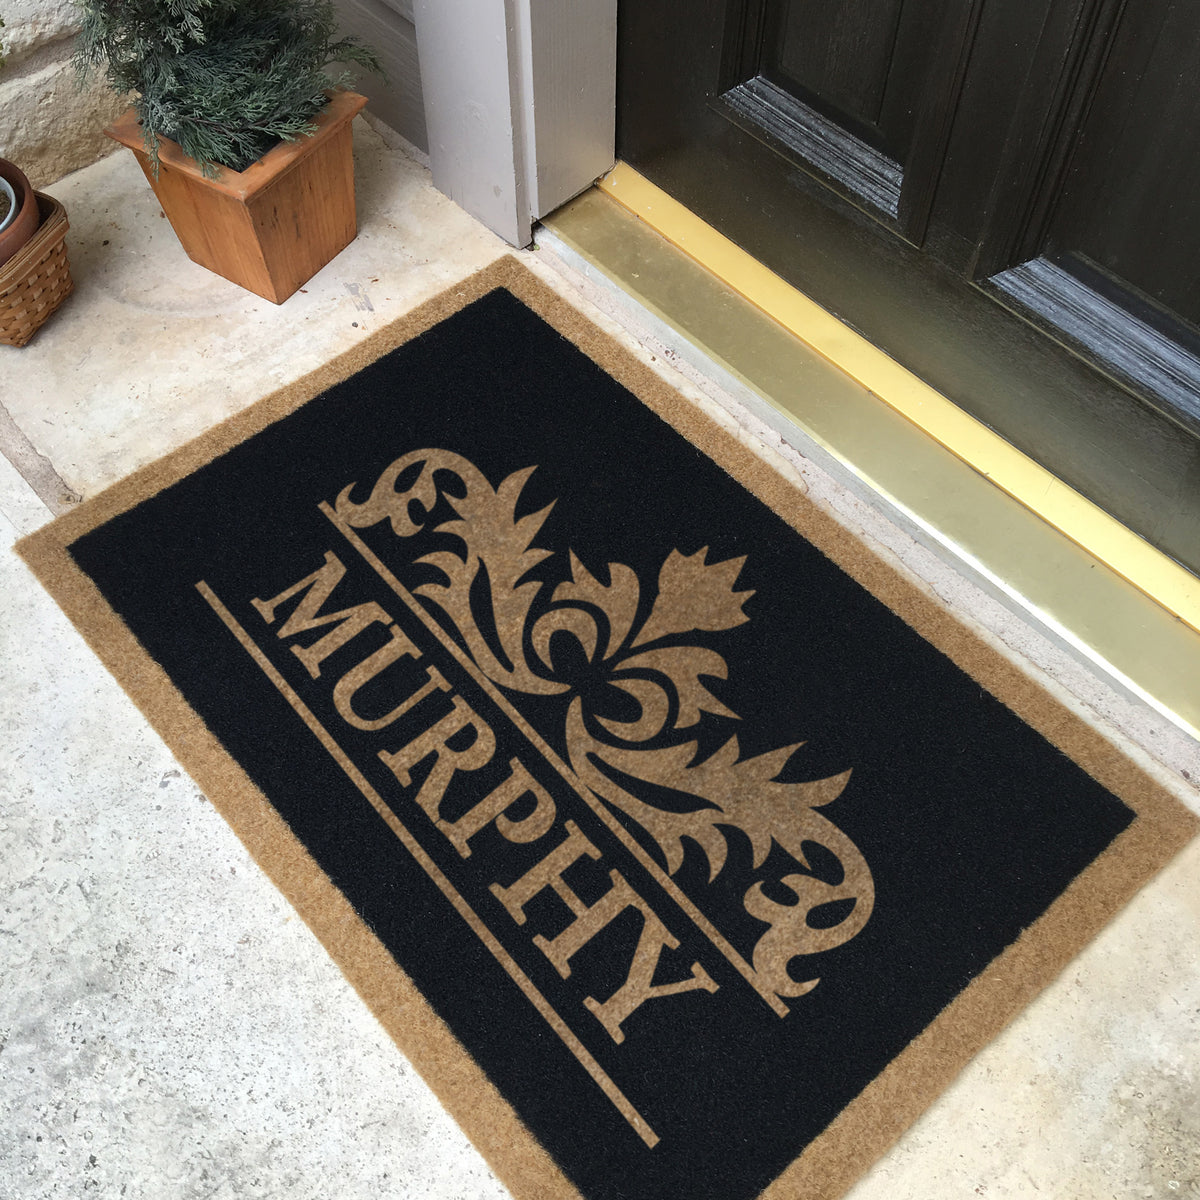 Infinity Custom Mats™ All-Weather Personalized Door Mat - STYLE: MURPHY COLOR:BLACK - rugsthatfit.com